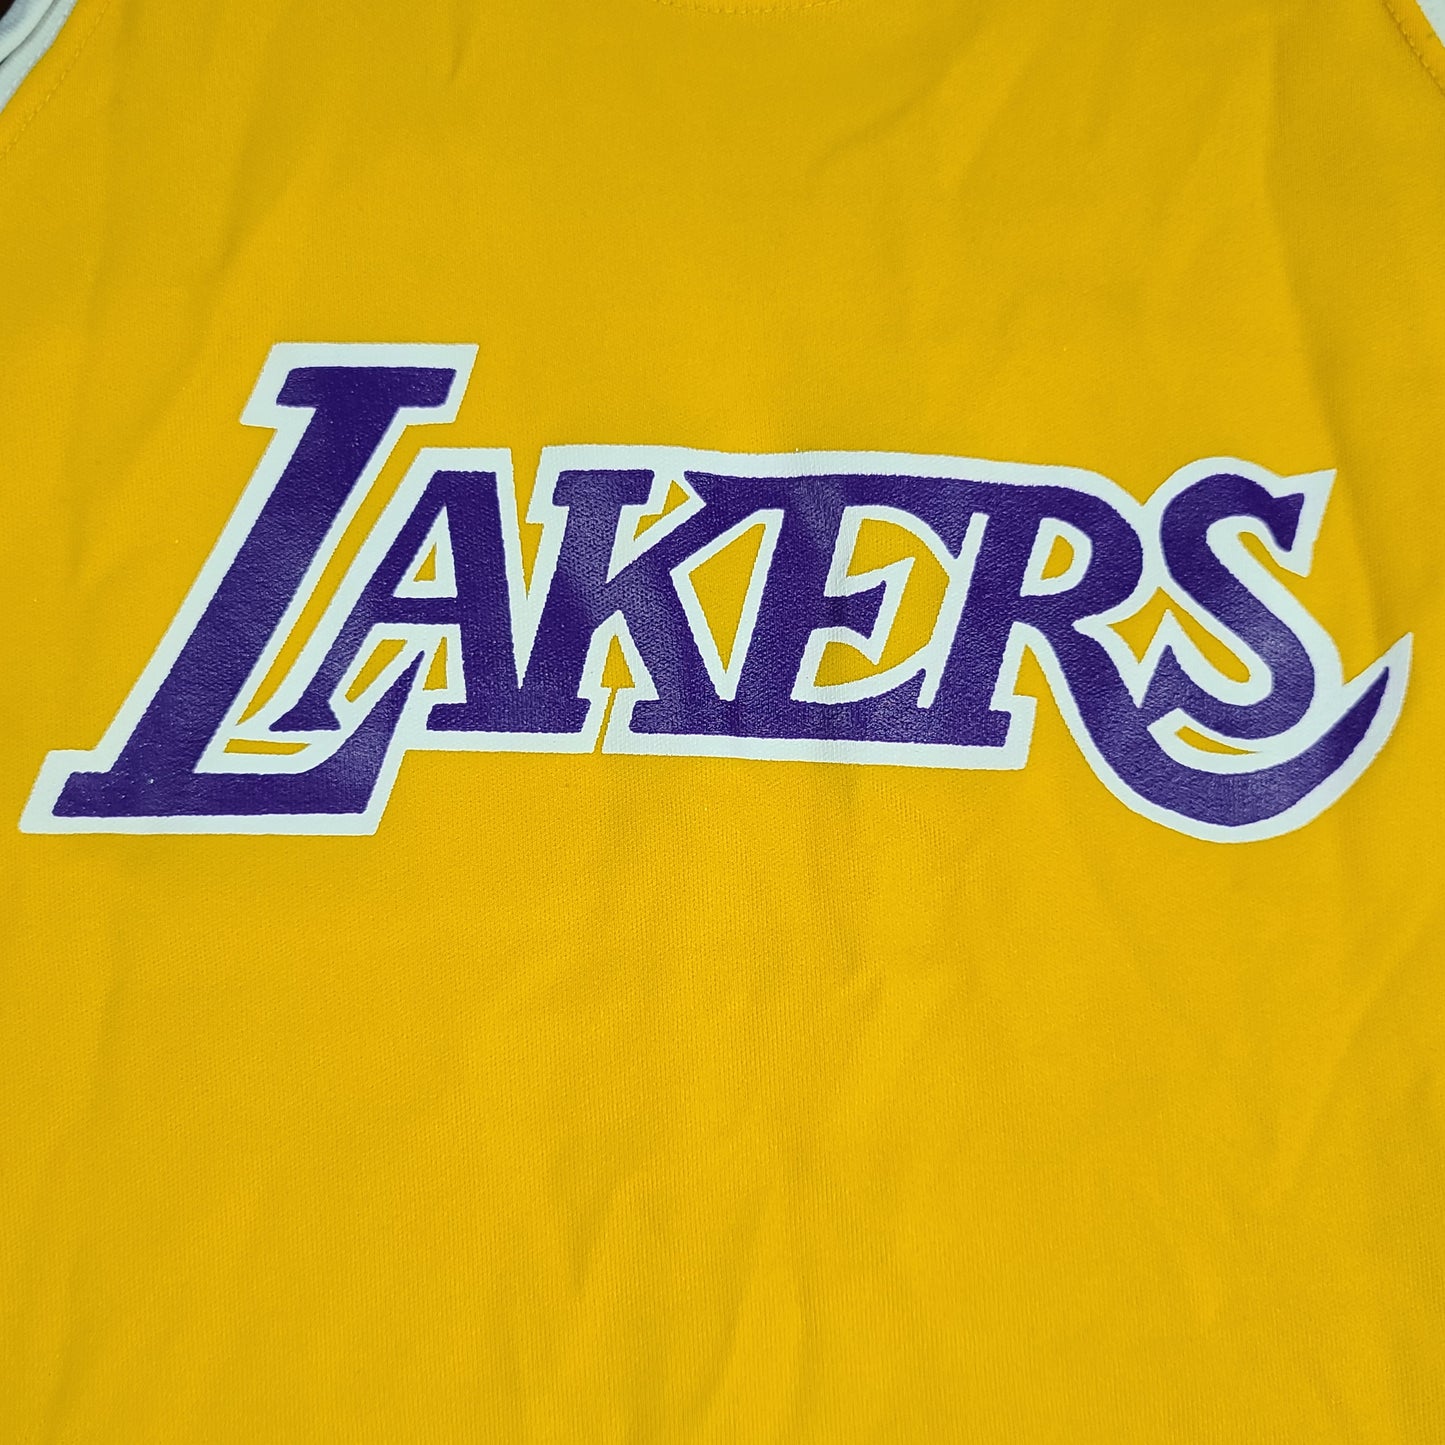 Vintage 80's Los Angeles Lakers Sand Knit Basketball Jersey